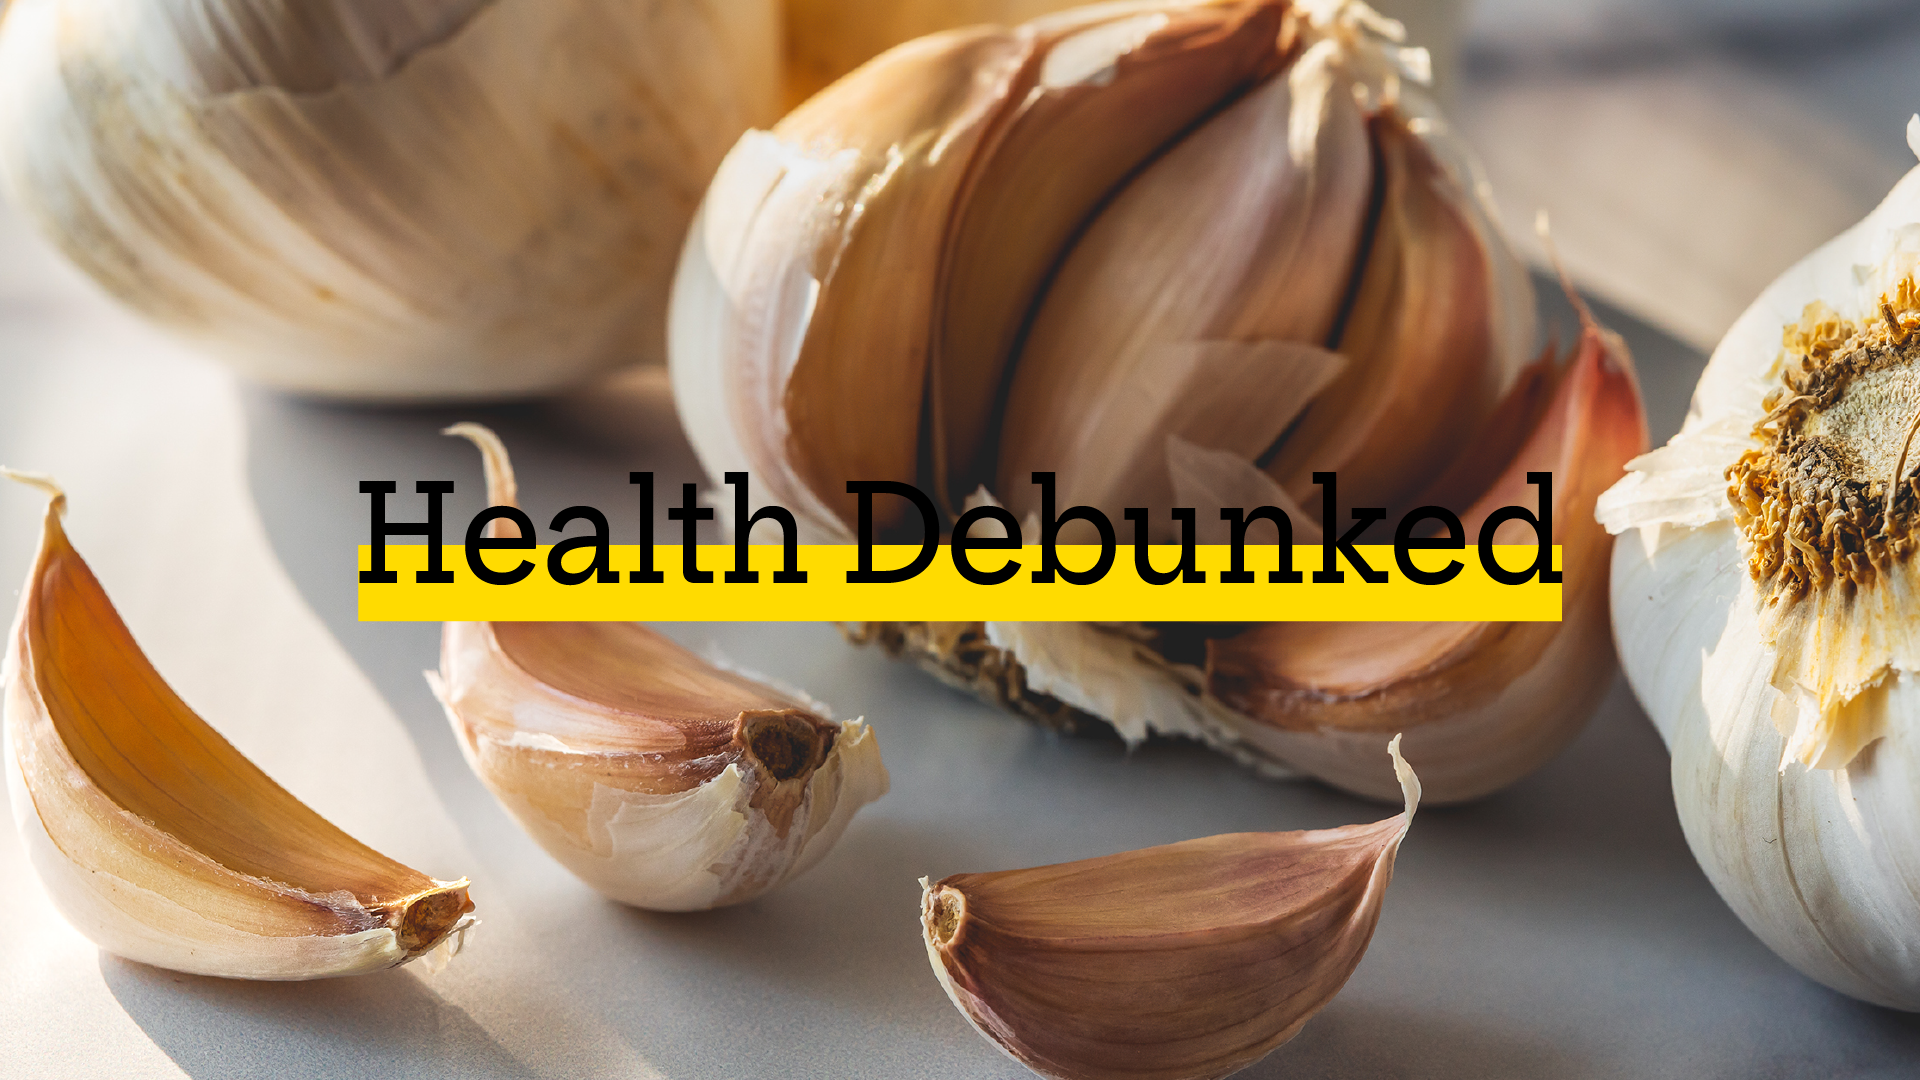 Is Garlic Beneficial for Yeast Infections?